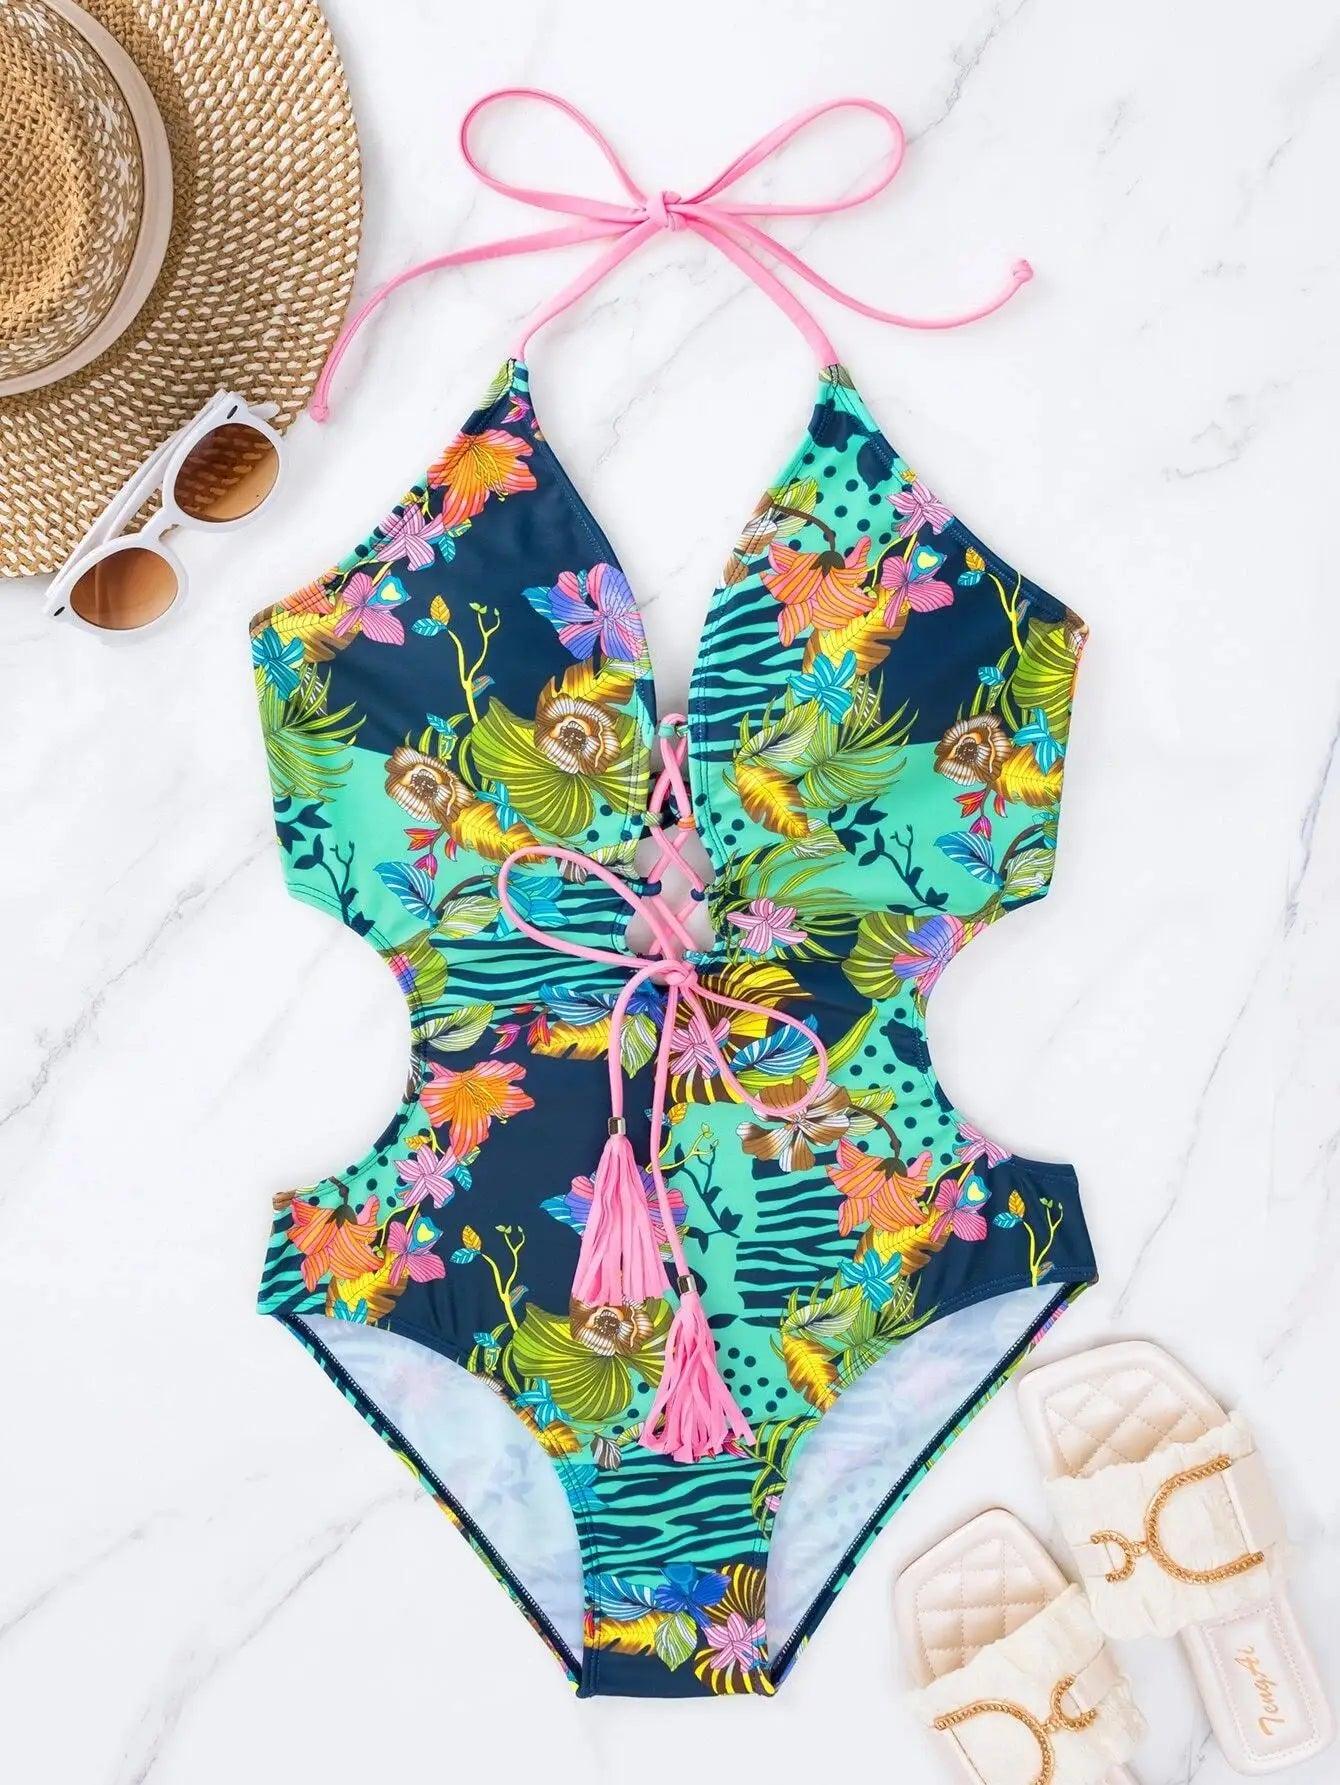 Women's Swimwear - 1PC Floral Print Lace Up Front One Piece Swimsuit